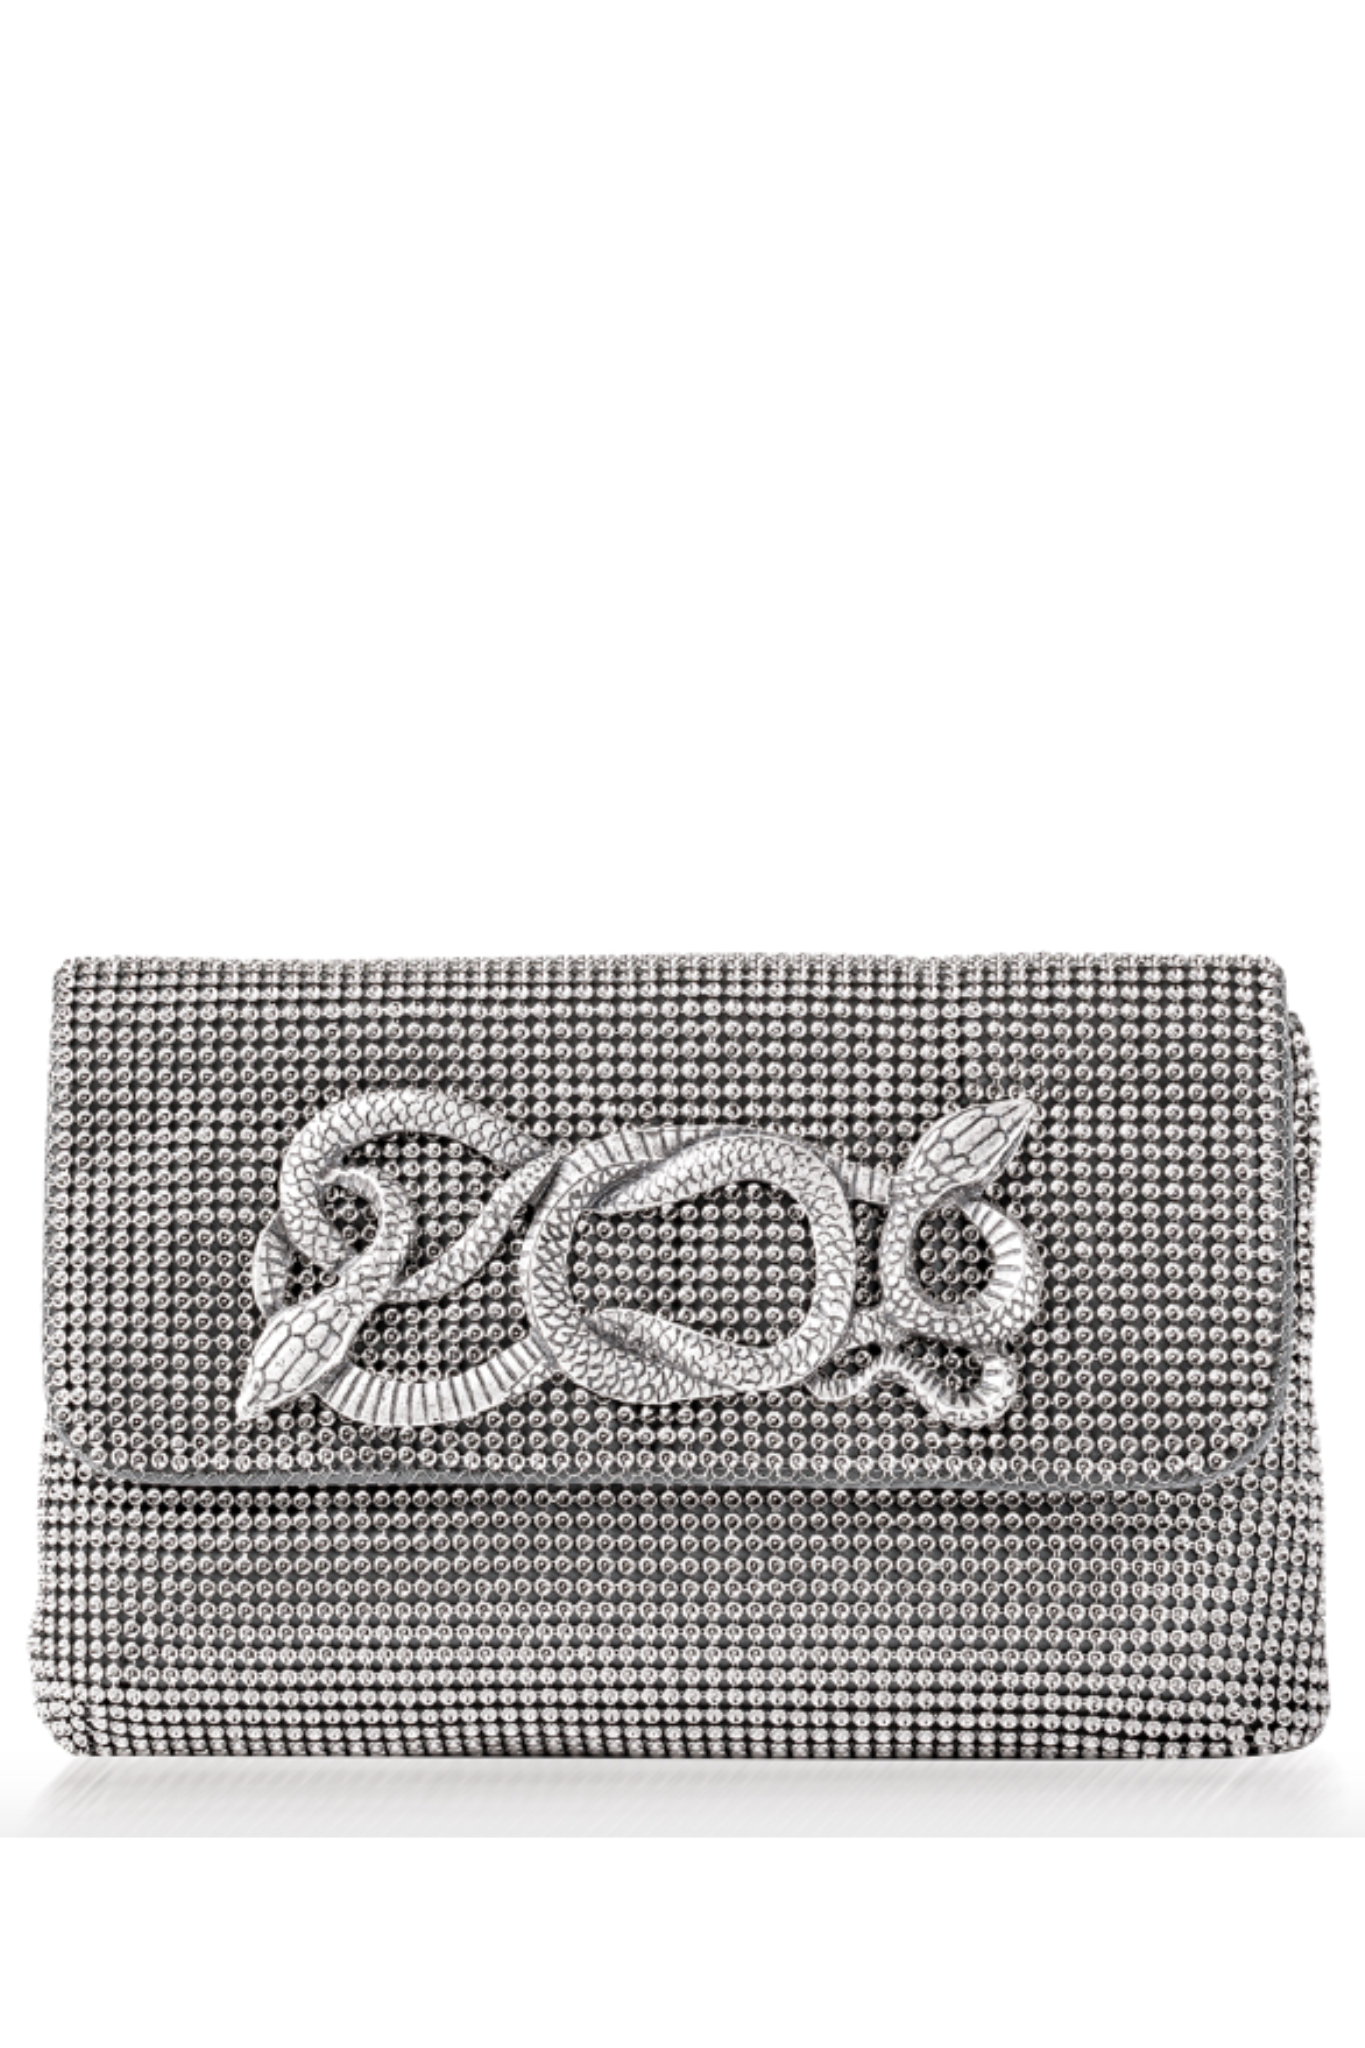 Serpents Envelope Clutch in Pewter by Whiting and Davis - RENTAL